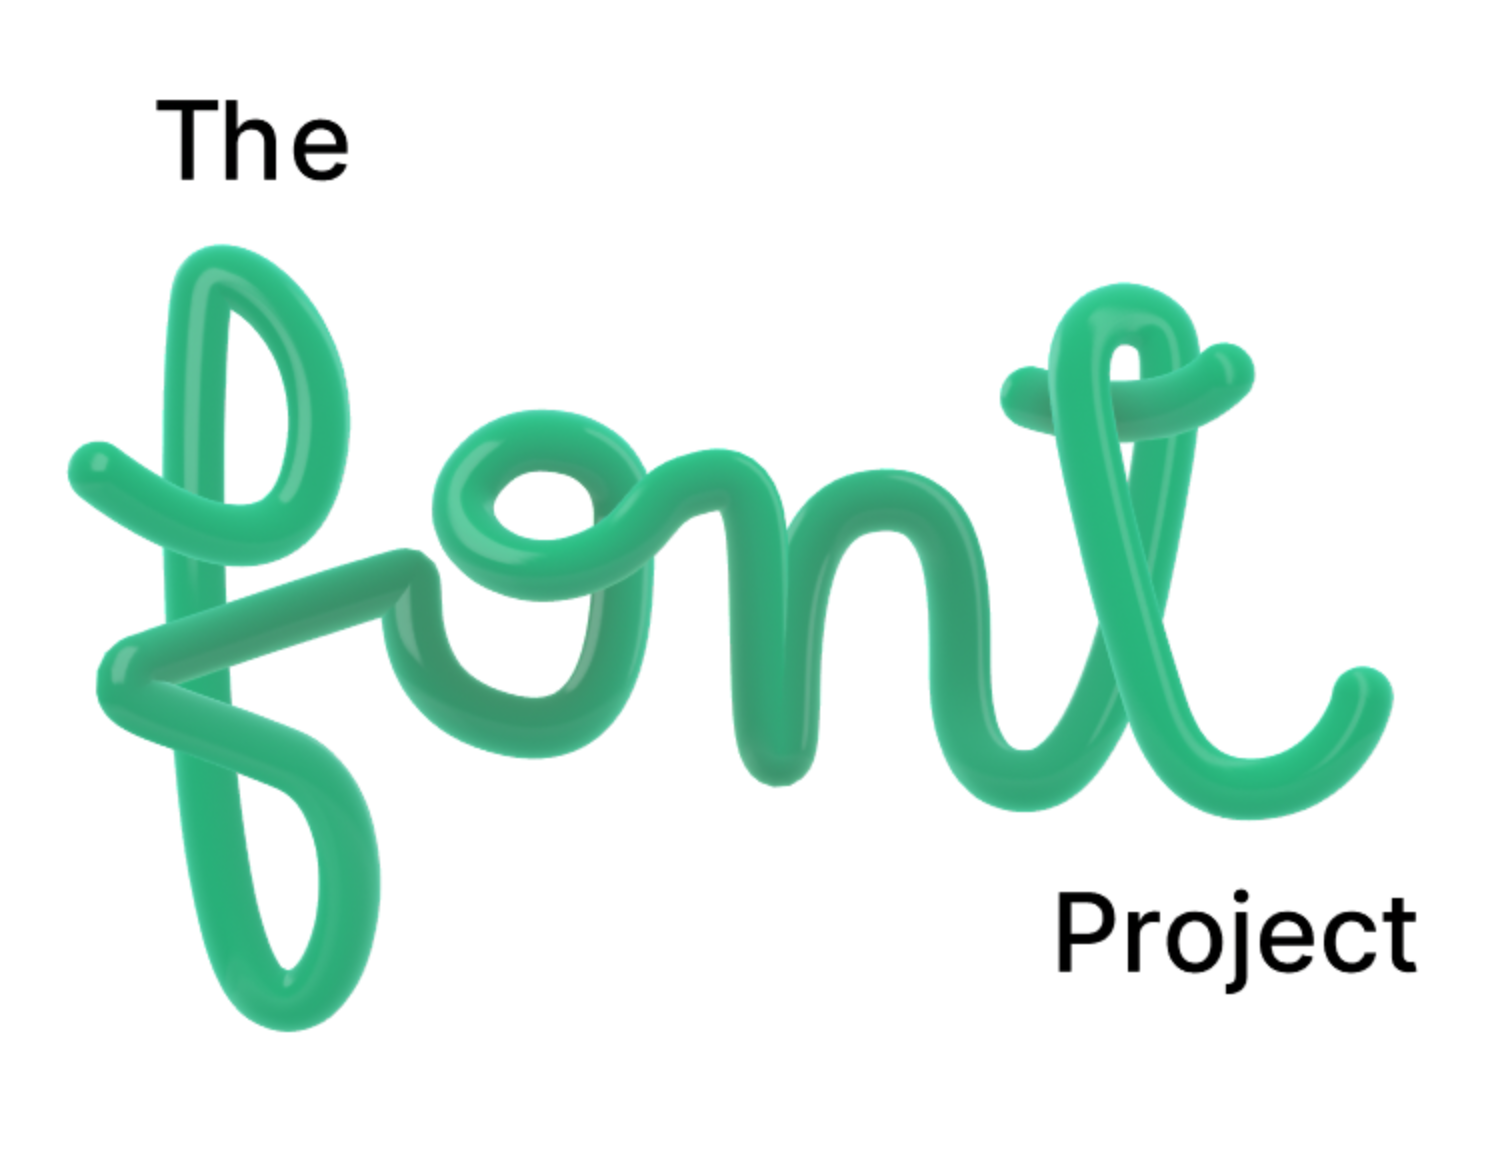 The font project